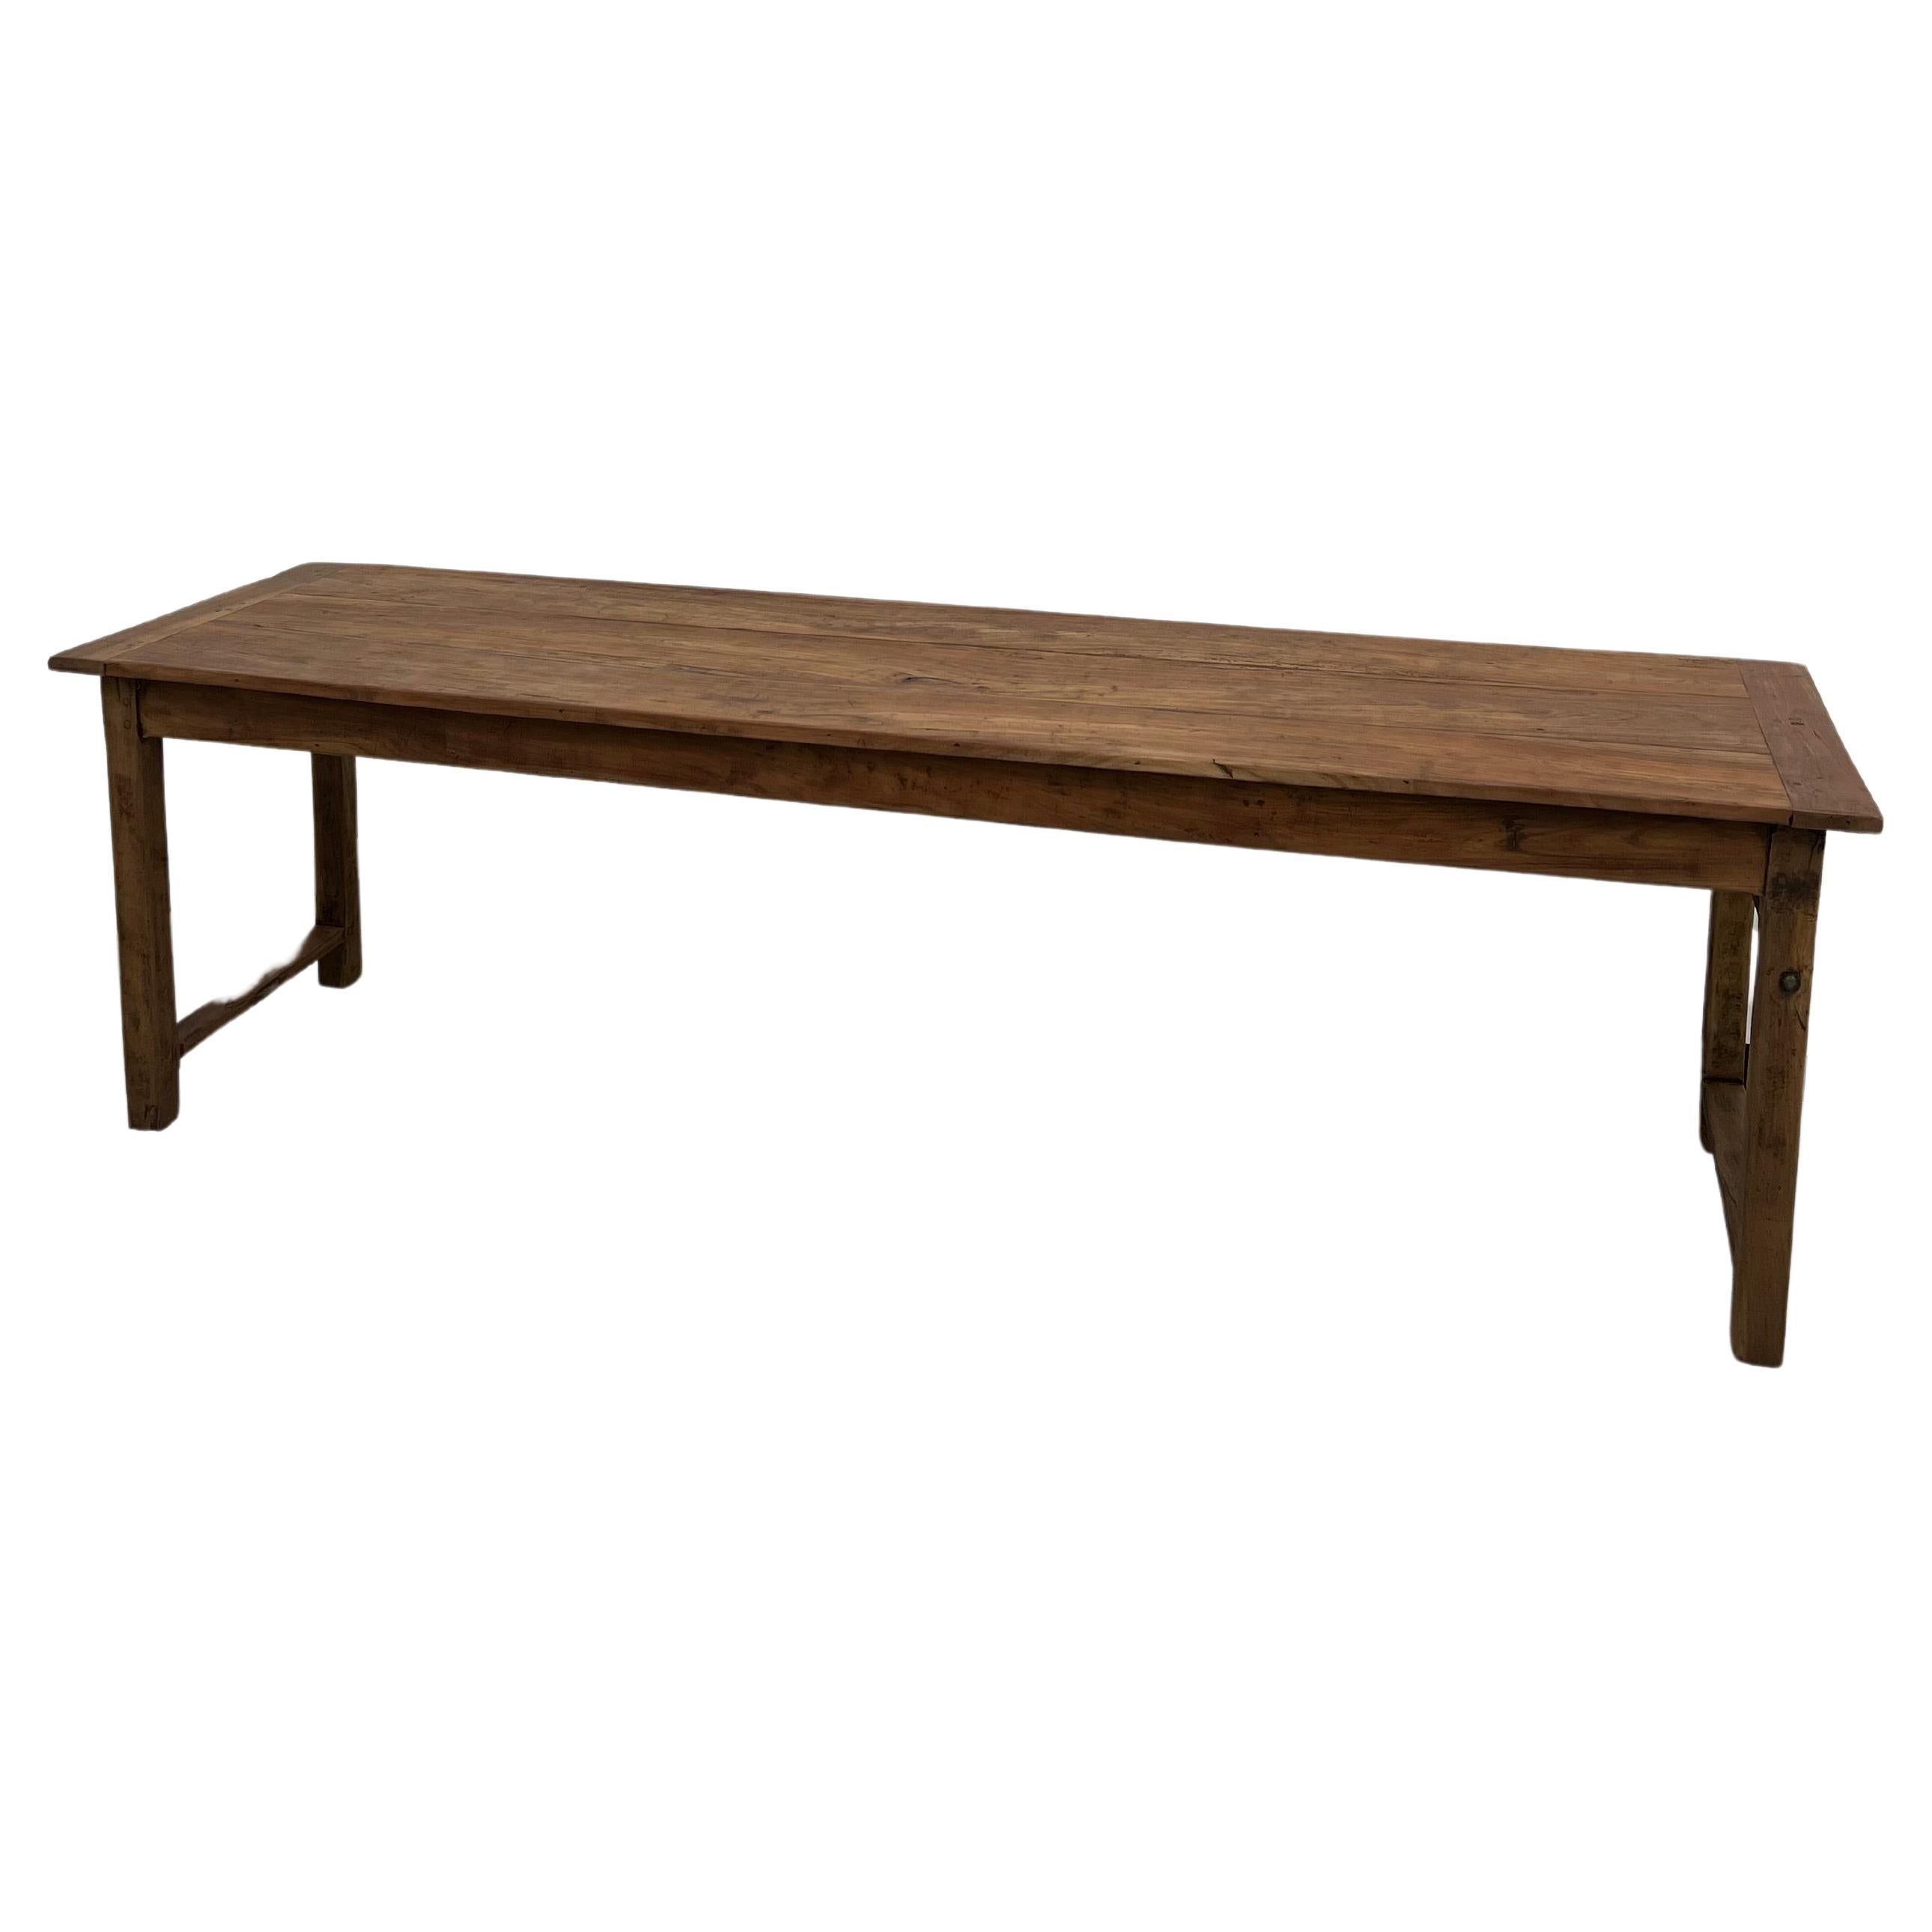 Late 19th century farm table in solid cherry wood